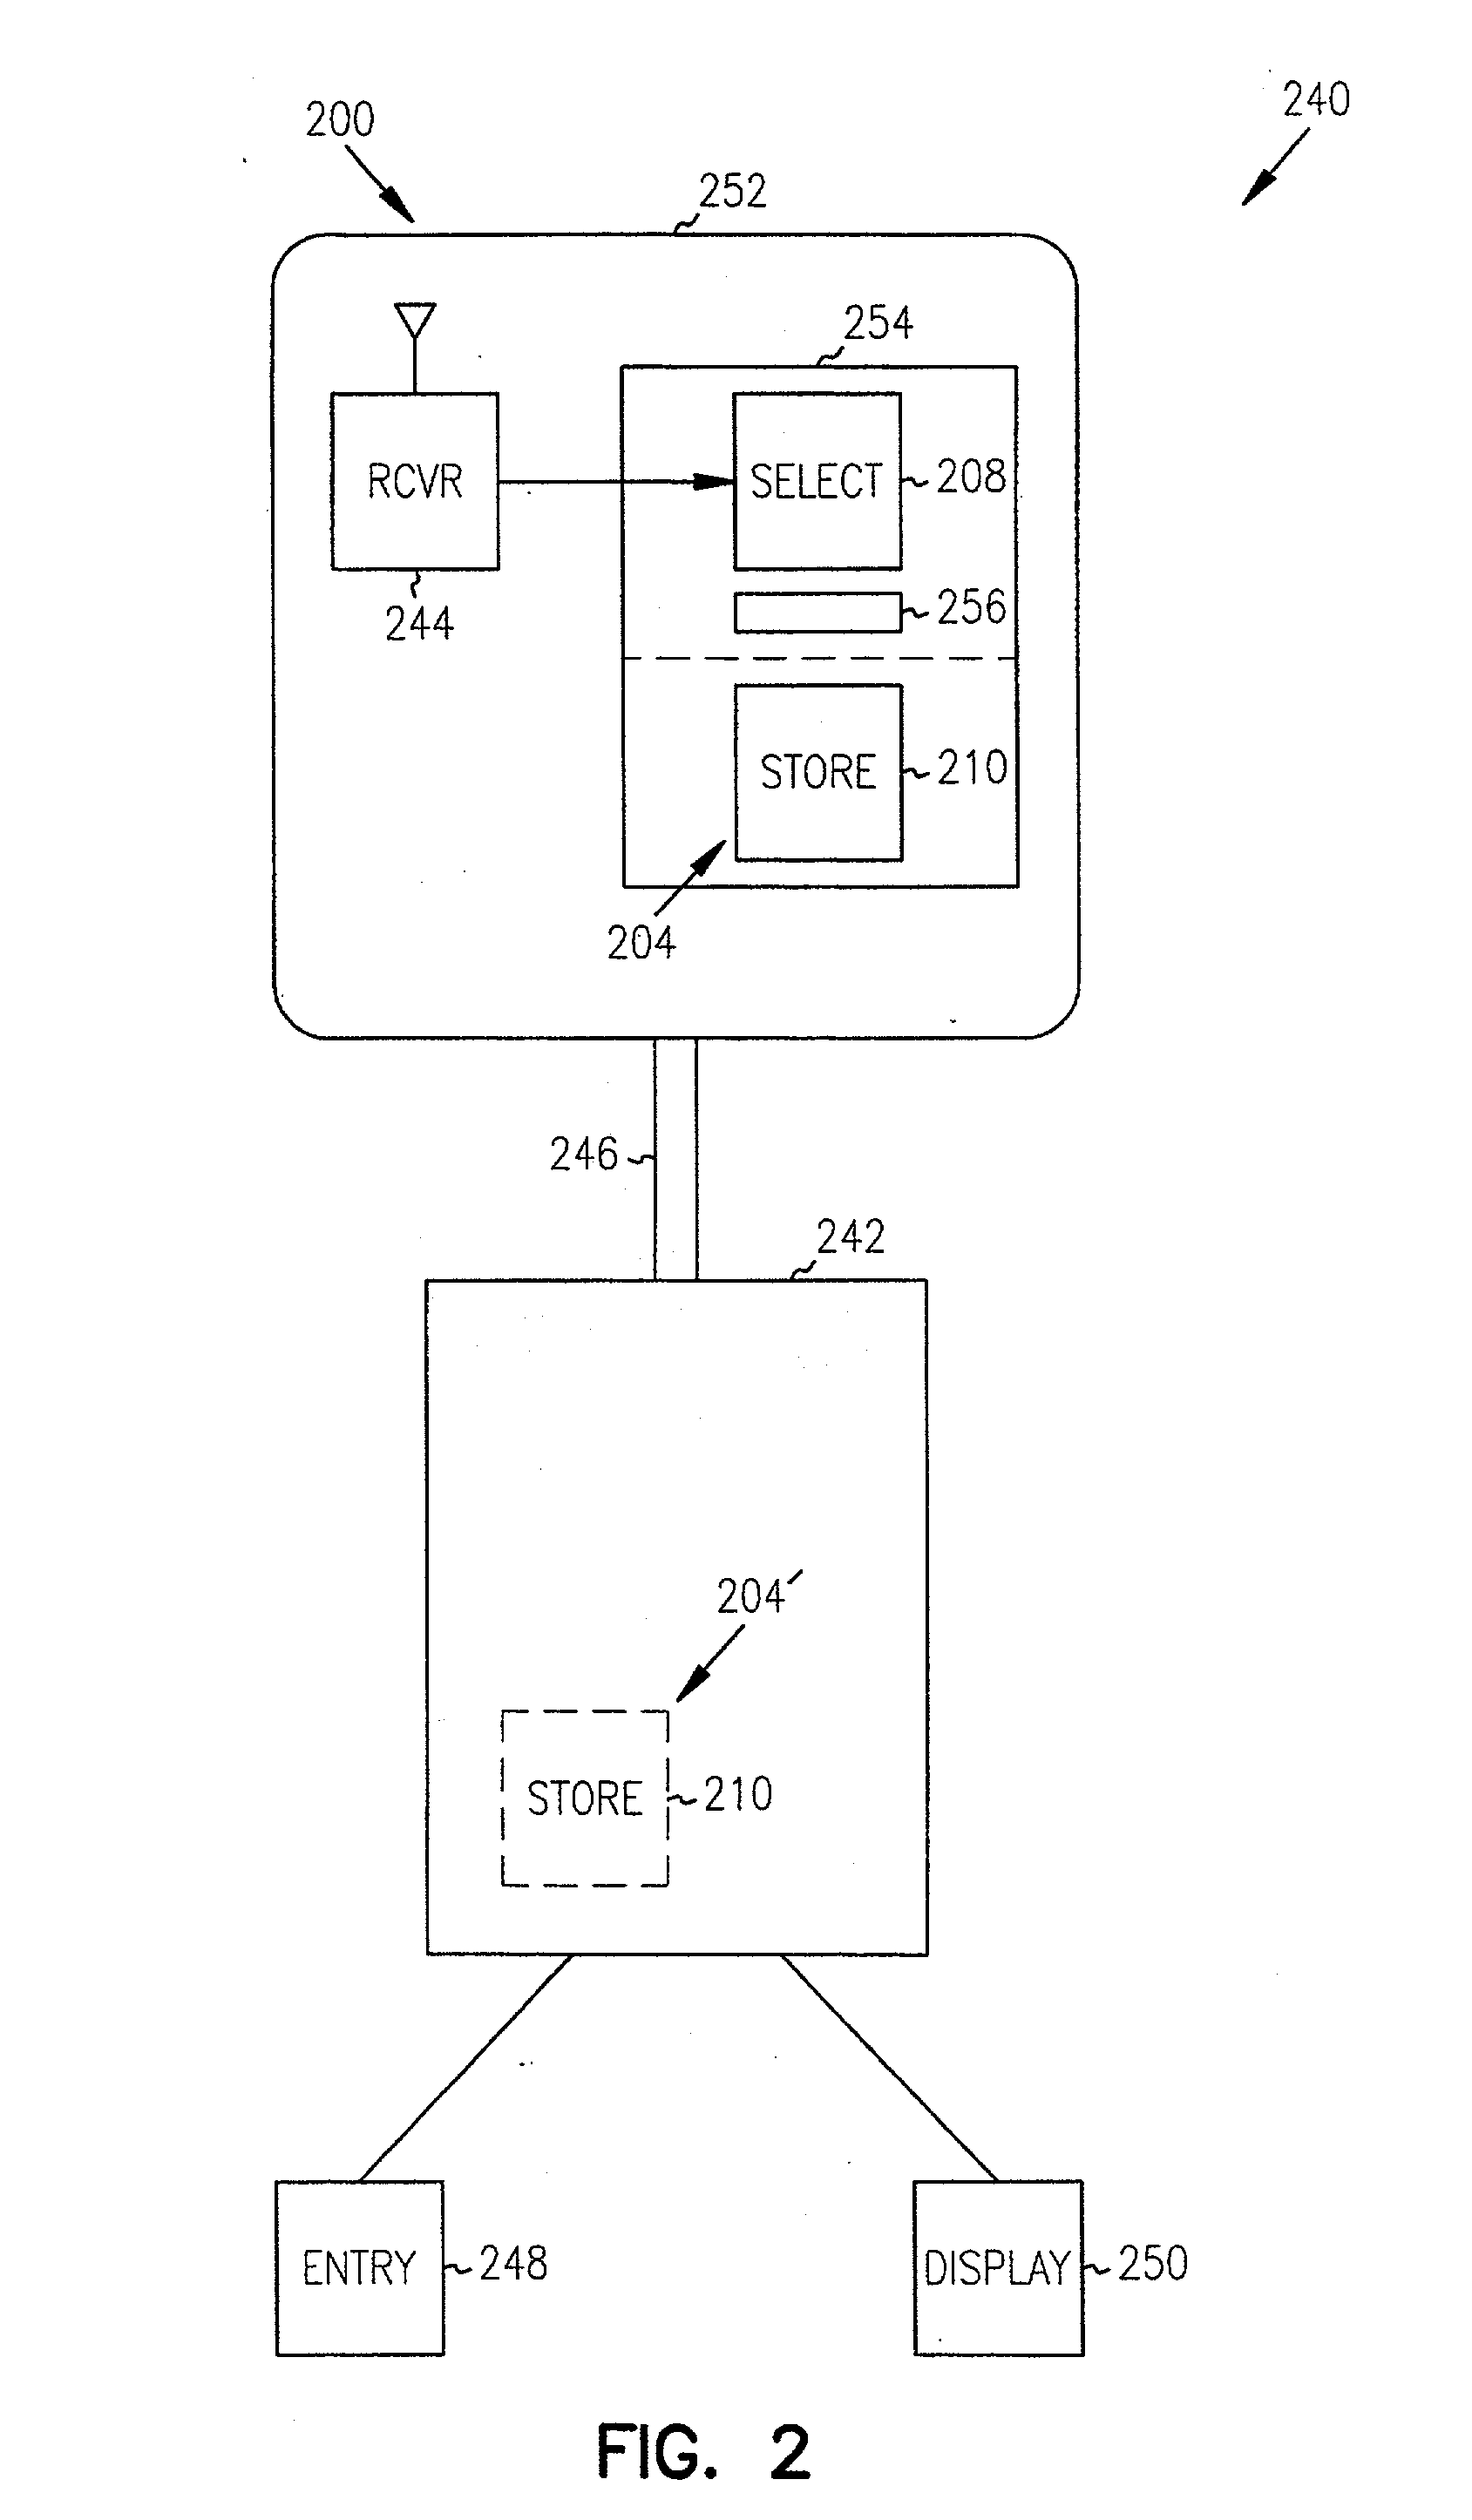 Content selection apparatus, system, and method